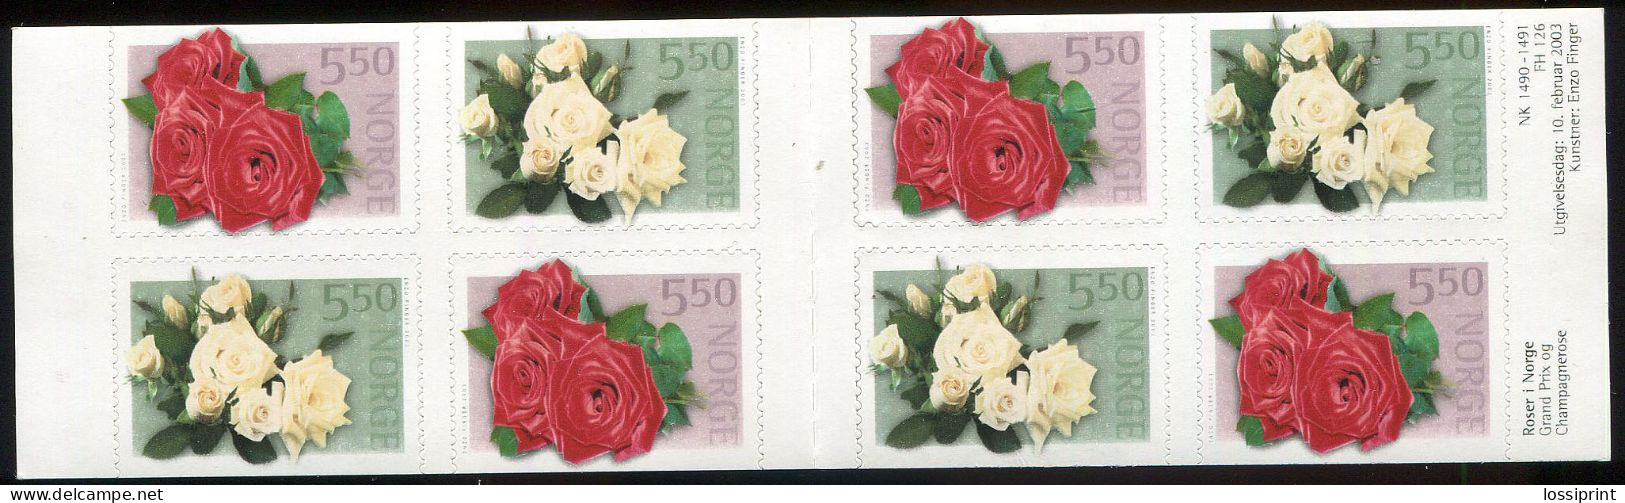 Norway:Unused Stamps Booklet Flowers, 2003, MNH - Rozen